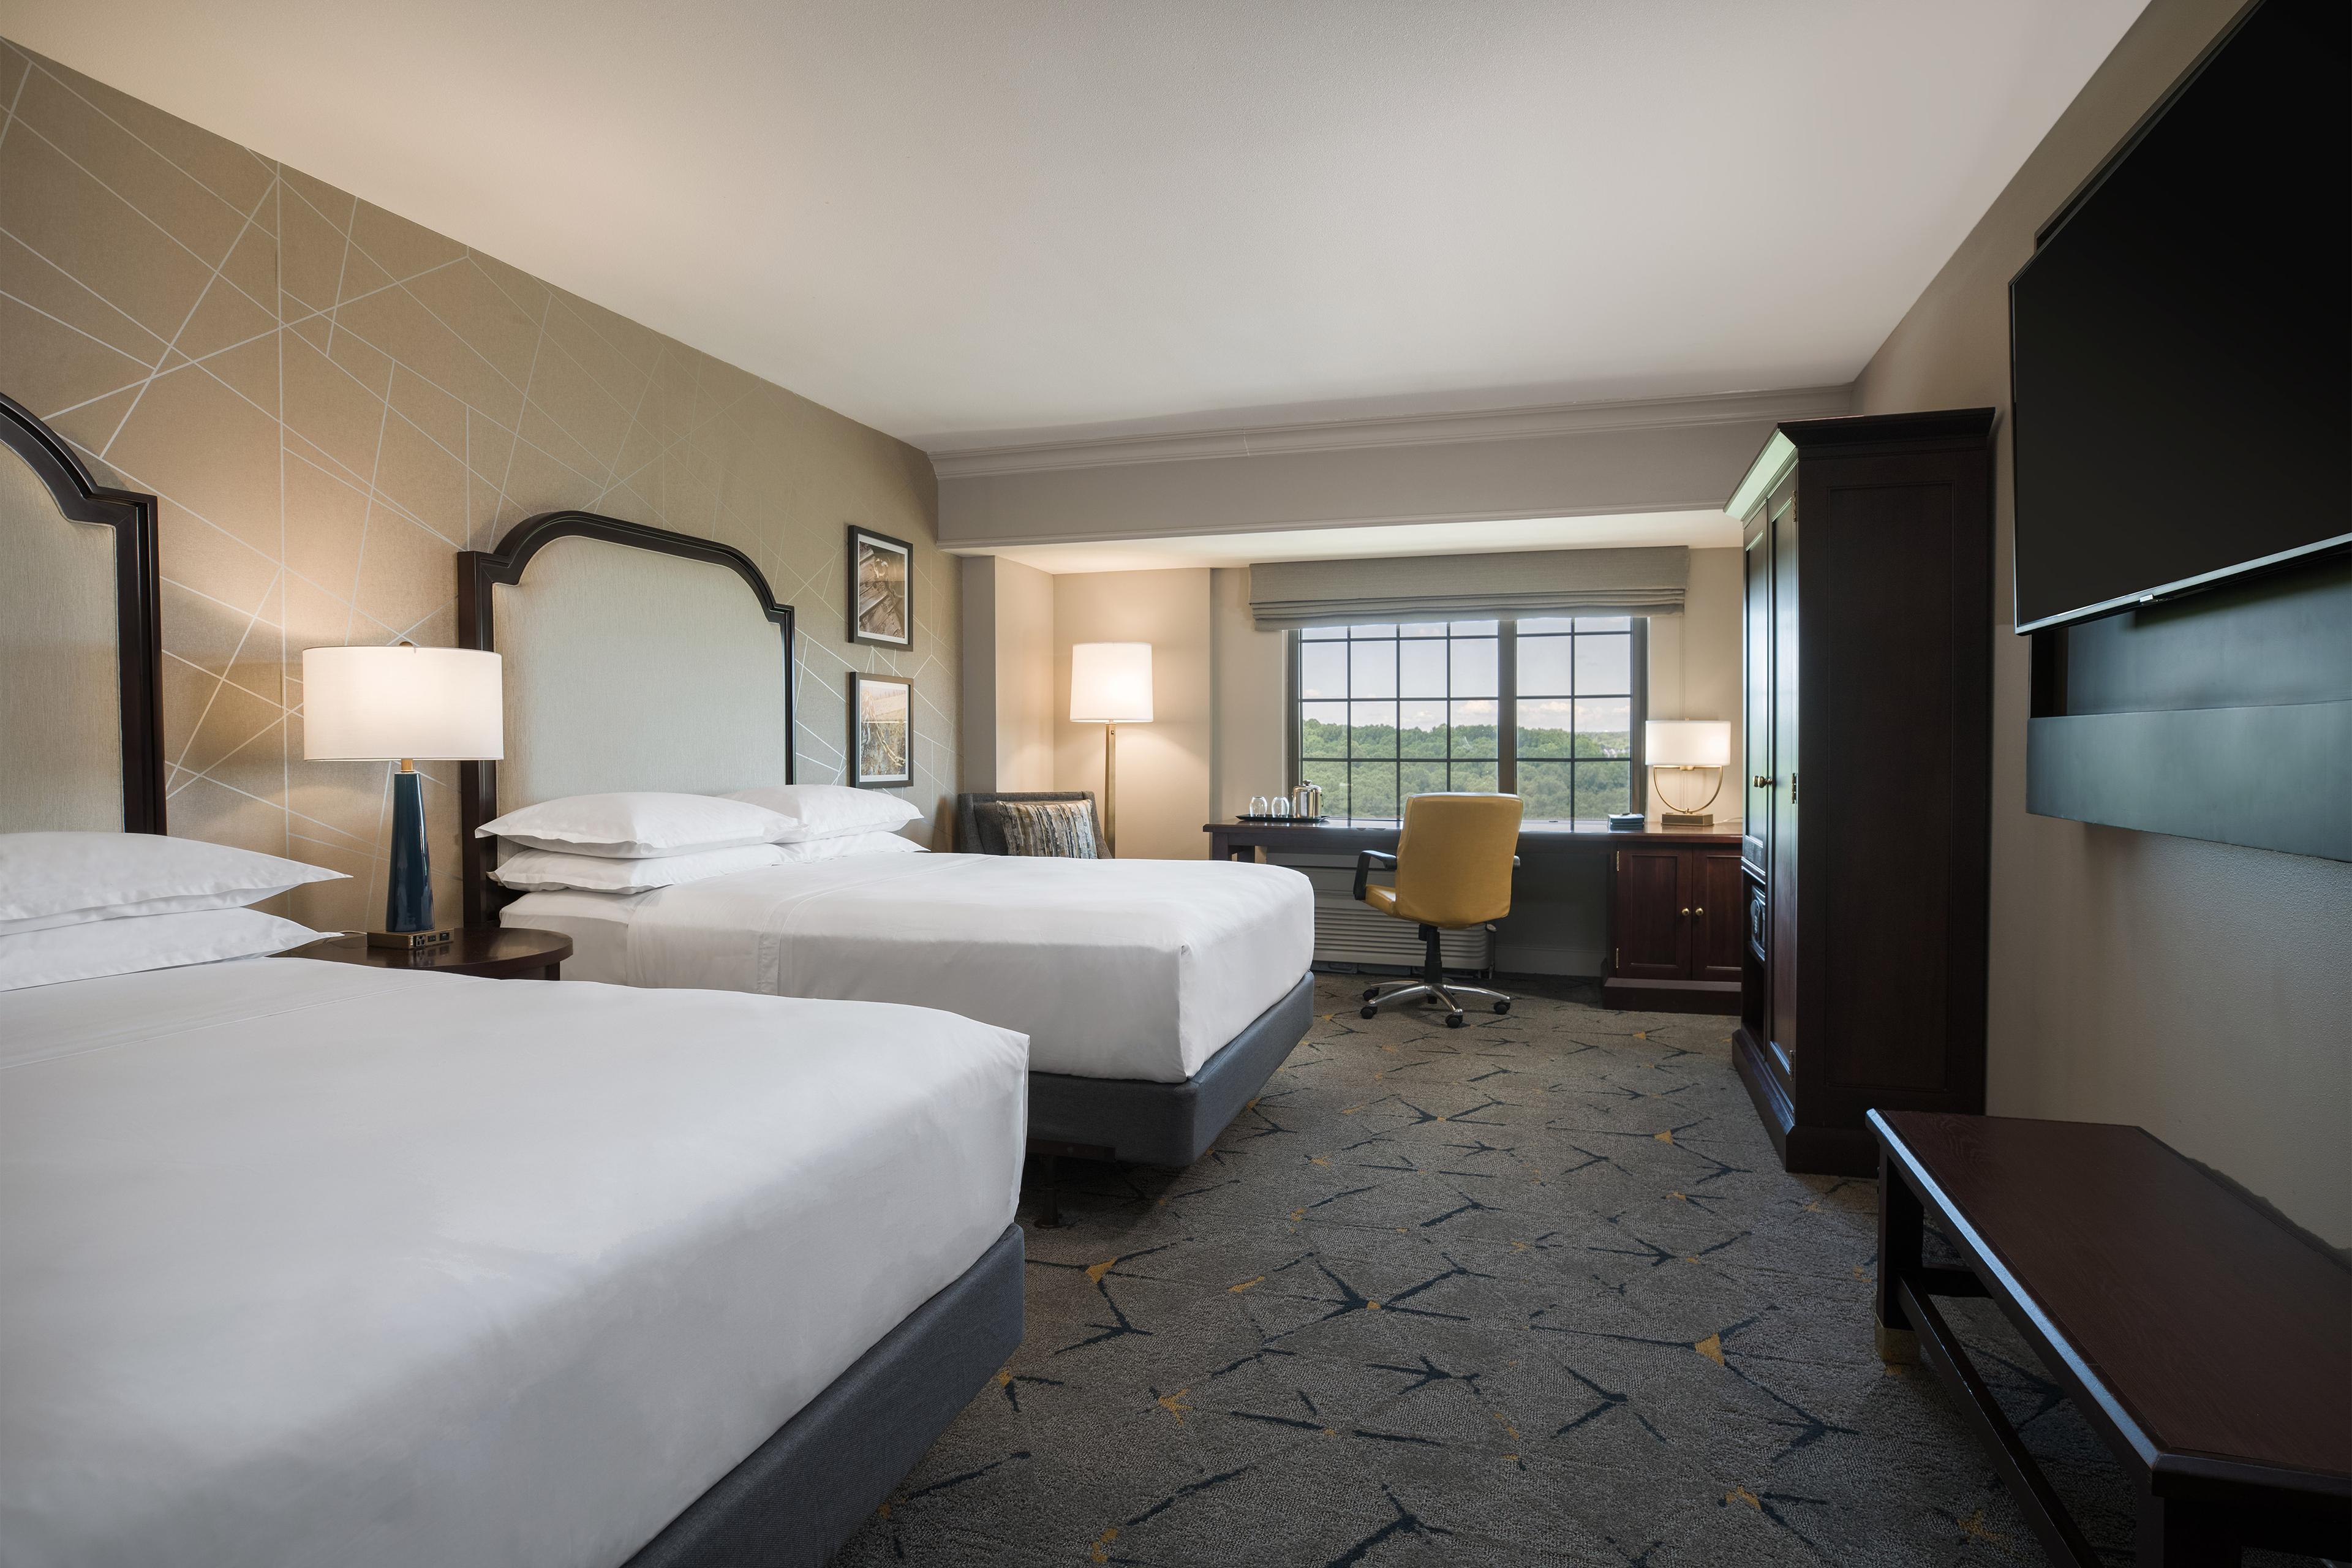 Rest easy in our new double guest room with two queen-sized Sheraton Signature beds, ergonomic work desk and scenic views.